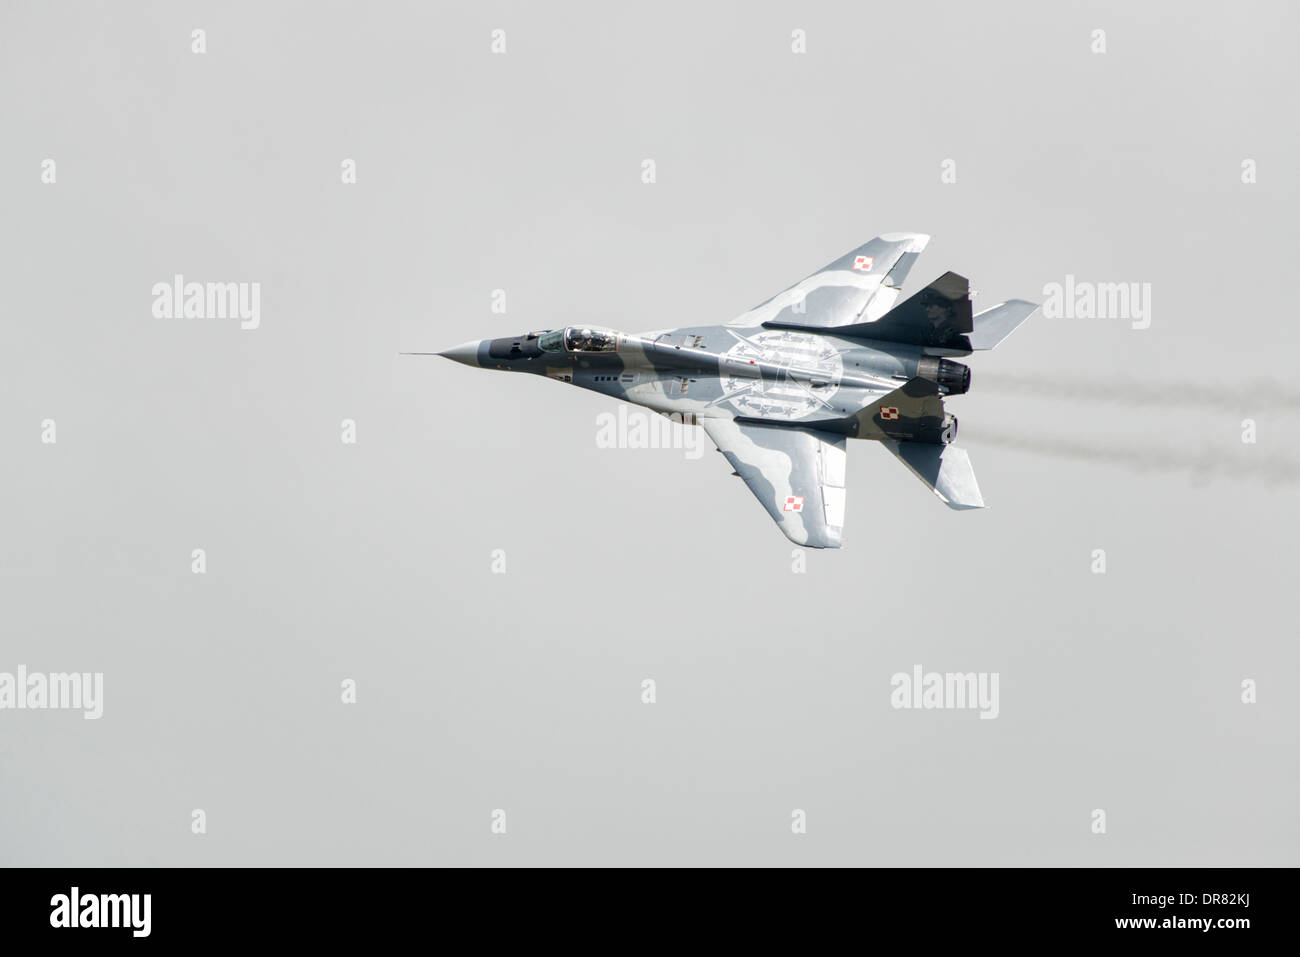 Mikoyan MiG-29 of the Polish Air Force Air Superiority Fighter Jet displays at RAF Fairford to take part in the 2013 Royal Inter Stock Photo